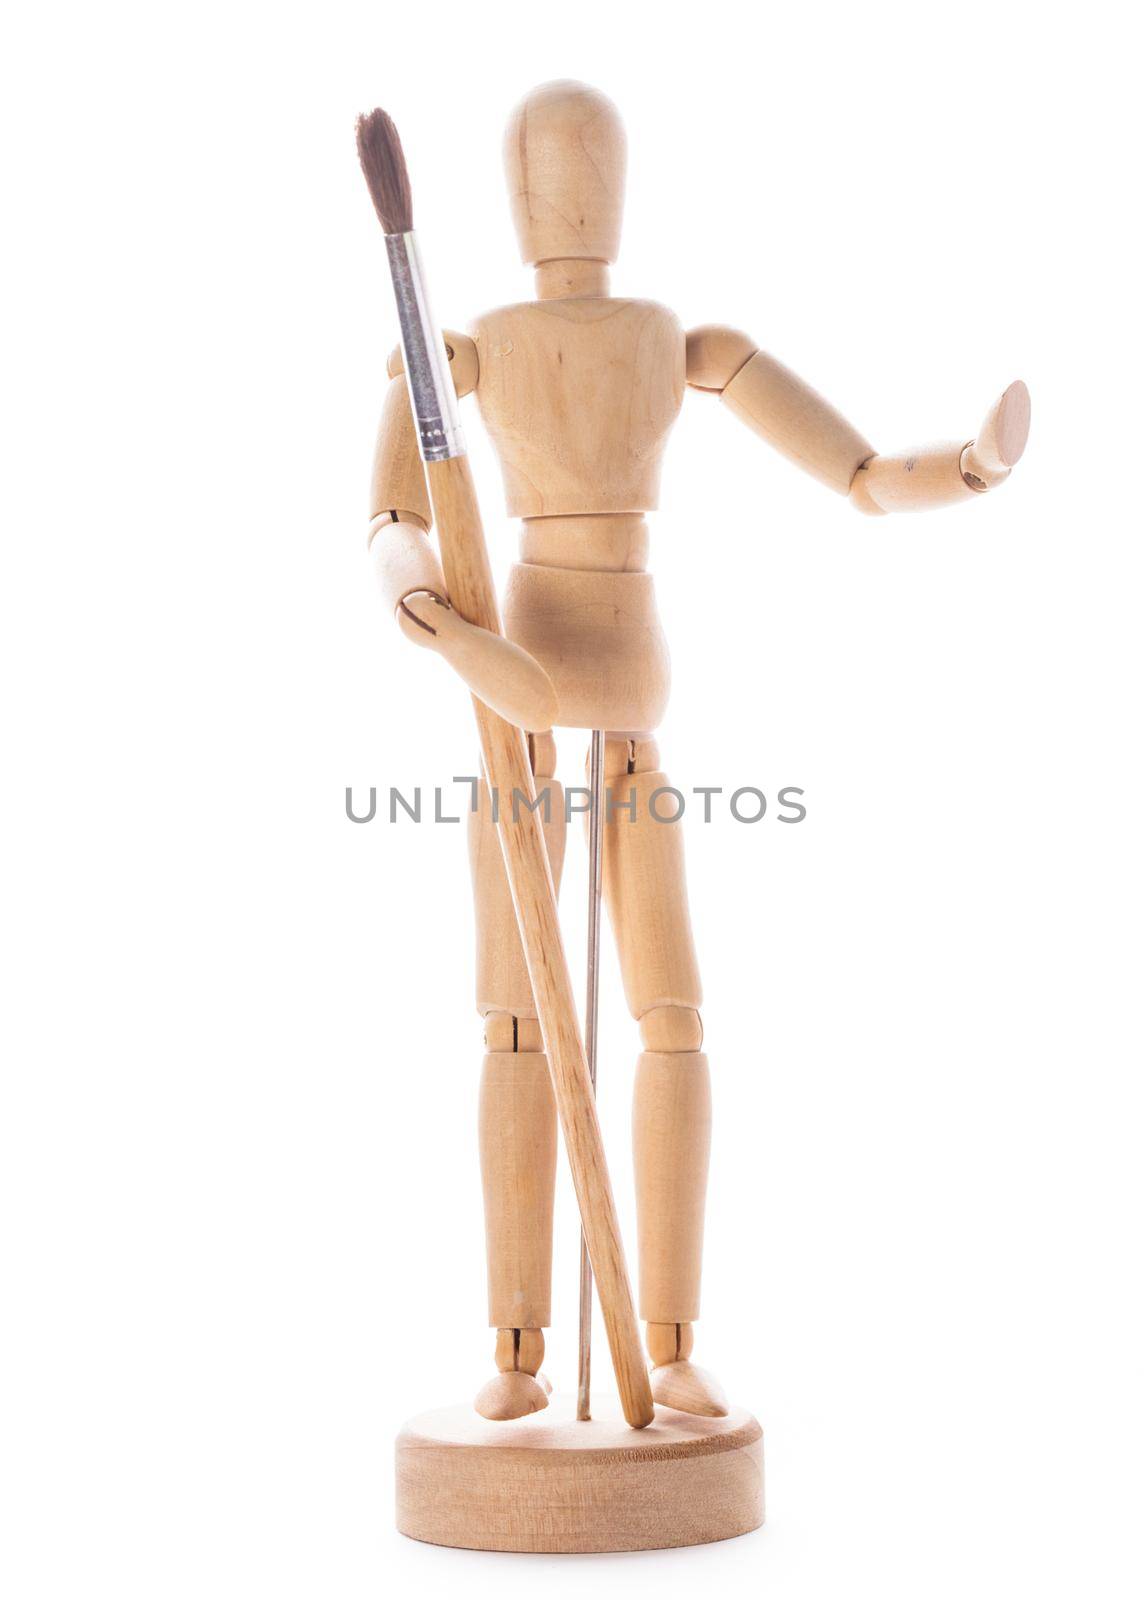 Art concept, wooden figure for modeling poses of human and paintbrush